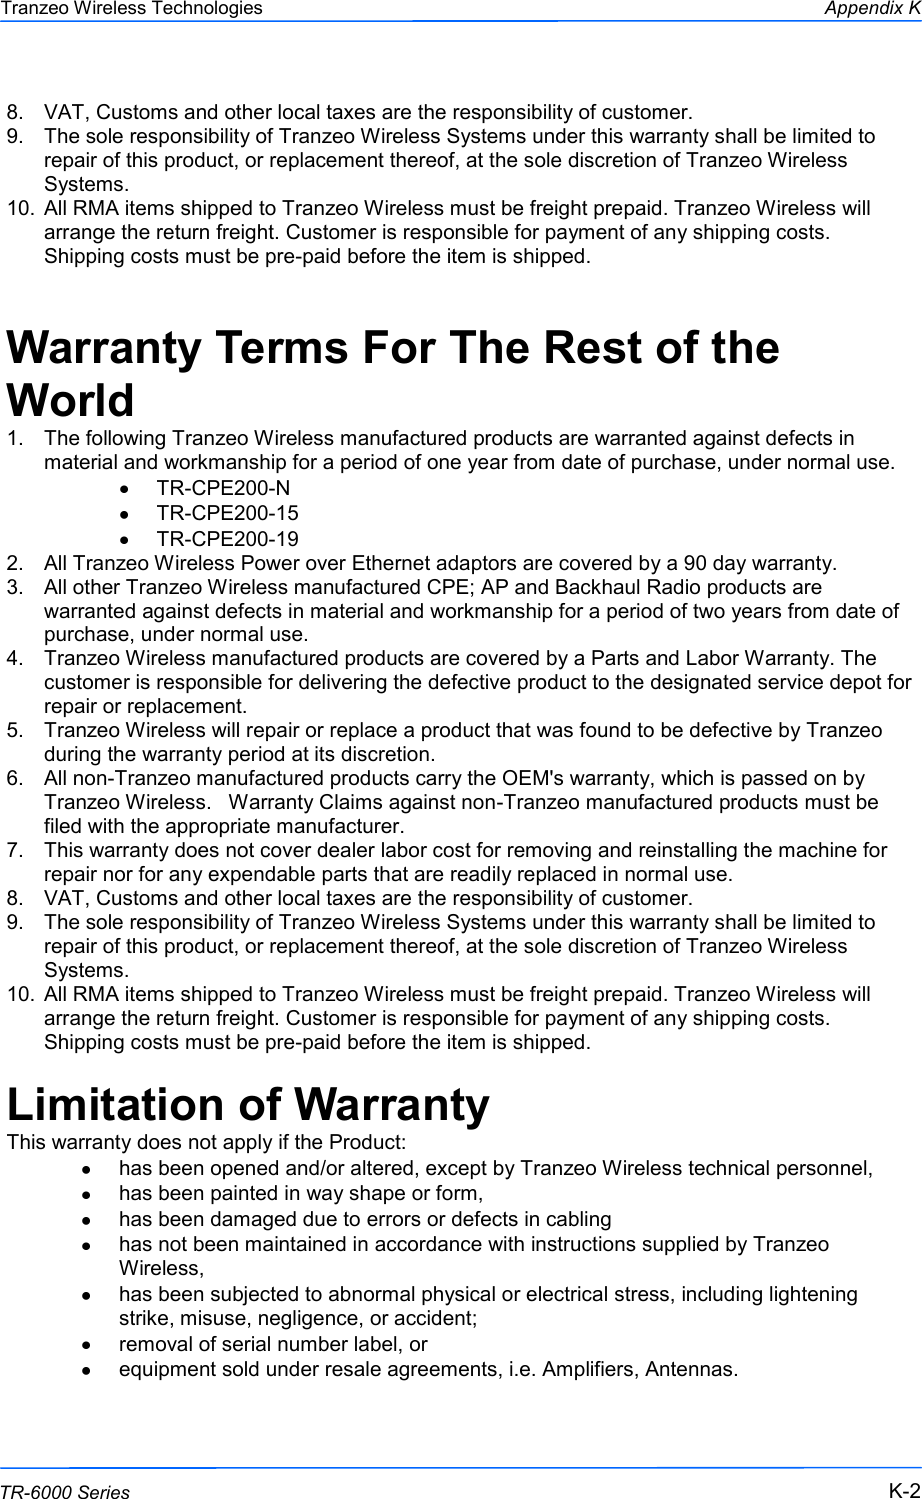  222 This document is intended for Public Distribution                         19473 Fraser Way, Pitt Meadows, B.C. Canada V3Y  2V4 Appendix K K-2 TR-6000 Series Tranzeo Wireless Technologies 8.  VAT, Customs and other local taxes are the responsibility of customer. 9.  The sole responsibility of Tranzeo Wireless Systems under this warranty shall be limited to repair of this product, or replacement thereof, at the sole discretion of Tranzeo Wireless Systems. 10.  All RMA items shipped to Tranzeo Wireless must be freight prepaid. Tranzeo Wireless will arrange the return freight. Customer is responsible for payment of any shipping costs. Shipping costs must be pre-paid before the item is shipped.  Warranty Terms For The Rest of the World 1.  The following Tranzeo Wireless manufactured products are warranted against defects in material and workmanship for a period of one year from date of purchase, under normal use. TR-CPE200-N TR-CPE200-15 TR-CPE200-19 2.  All Tranzeo Wireless Power over Ethernet adaptors are covered by a 90 day warranty. 3.  All other Tranzeo Wireless manufactured CPE; AP and Backhaul Radio products are warranted against defects in material and workmanship for a period of two years from date of purchase, under normal use. 4.  Tranzeo Wireless manufactured products are covered by a Parts and Labor Warranty. The customer is responsible for delivering the defective product to the designated service depot for repair or replacement. 5.  Tranzeo Wireless will repair or replace a product that was found to be defective by Tranzeo during the warranty period at its discretion. 6.  All non-Tranzeo manufactured products carry the OEM&apos;s warranty, which is passed on by Tranzeo Wireless.   Warranty Claims against non-Tranzeo manufactured products must be filed with the appropriate manufacturer. 7.  This warranty does not cover dealer labor cost for removing and reinstalling the machine for repair nor for any expendable parts that are readily replaced in normal use. 8.  VAT, Customs and other local taxes are the responsibility of customer. 9.  The sole responsibility of Tranzeo Wireless Systems under this warranty shall be limited to repair of this product, or replacement thereof, at the sole discretion of Tranzeo Wireless Systems. 10.  All RMA items shipped to Tranzeo Wireless must be freight prepaid. Tranzeo Wireless will arrange the return freight. Customer is responsible for payment of any shipping costs. Shipping costs must be pre-paid before the item is shipped.  Limitation of Warranty This warranty does not apply if the Product: has been opened and/or altered, except by Tranzeo Wireless technical personnel, has been painted in way shape or form, has been damaged due to errors or defects in cabling has not been maintained in accordance with instructions supplied by Tranzeo Wireless, has been subjected to abnormal physical or electrical stress, including lightening strike, misuse, negligence, or accident; removal of serial number label, or equipment sold under resale agreements, i.e. Amplifiers, Antennas.  